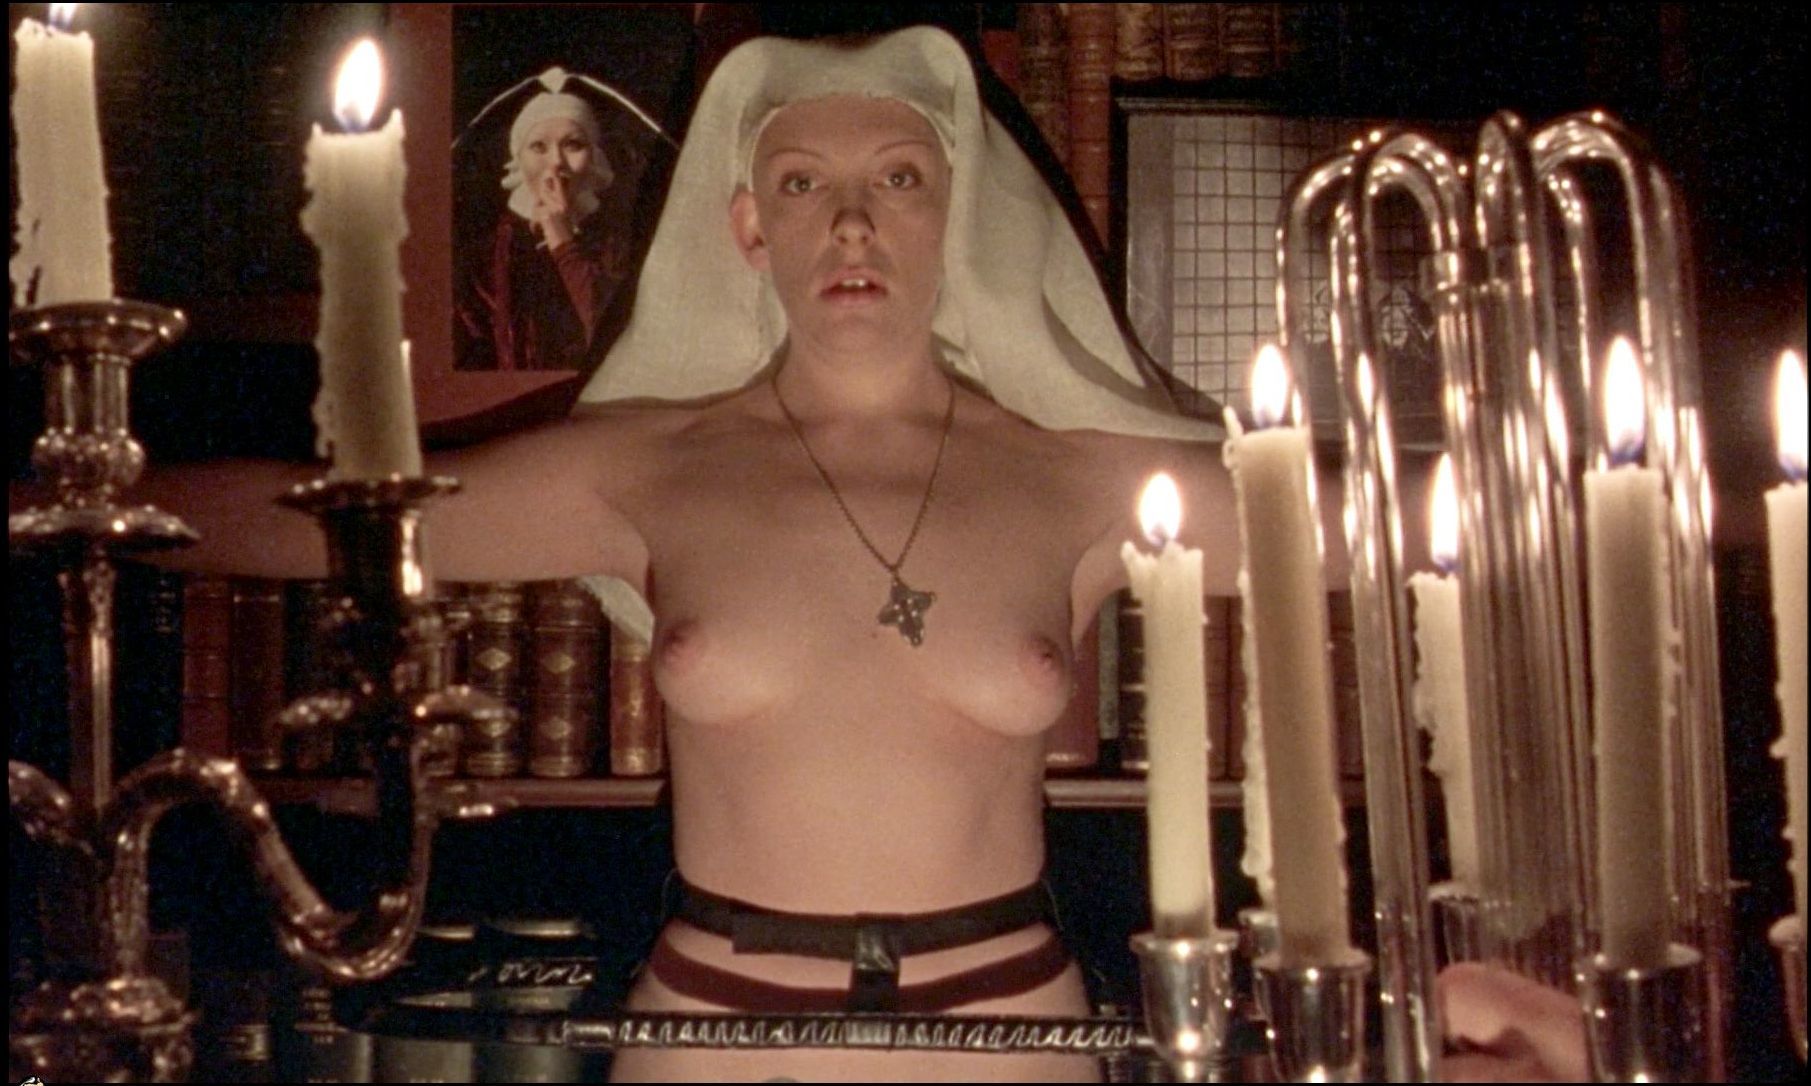 Naked Toni Collette In 8½ Women